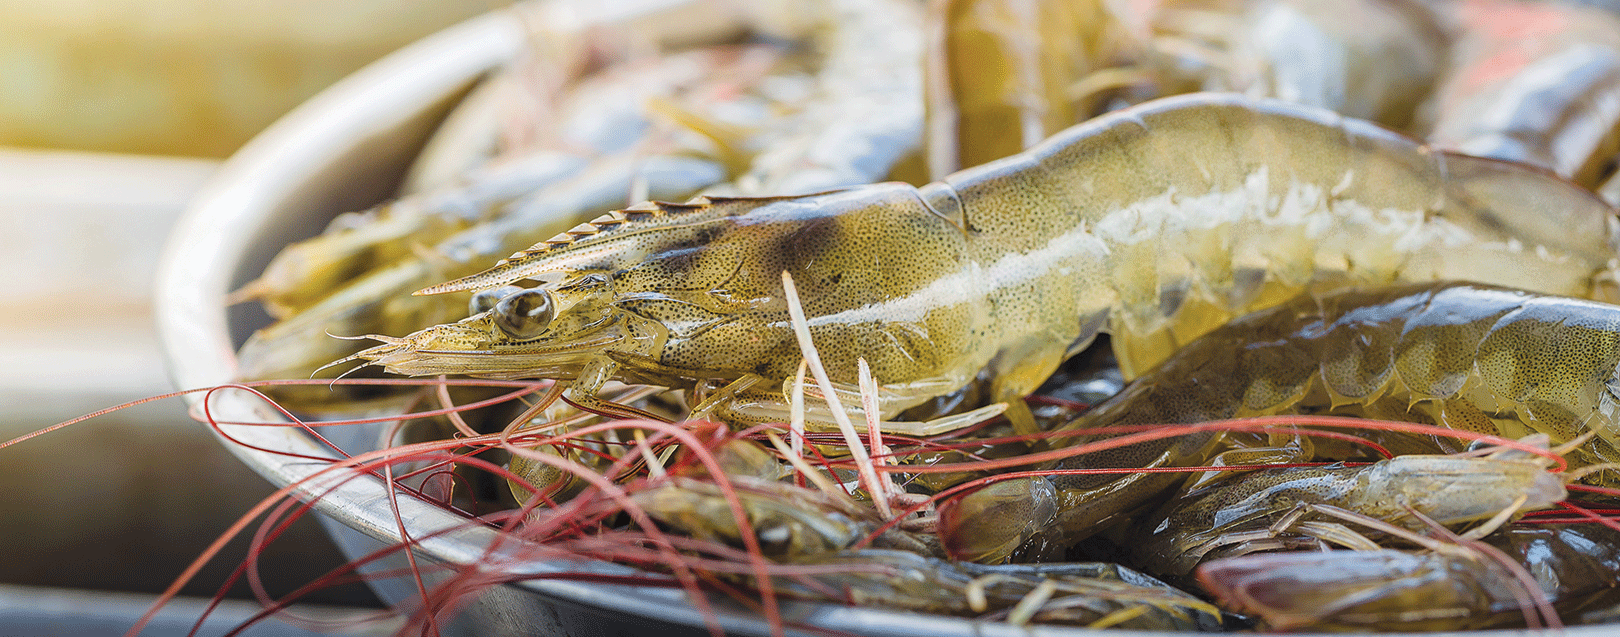 Frozen Shrimps and Prawins-The prize catch March 2018 issue